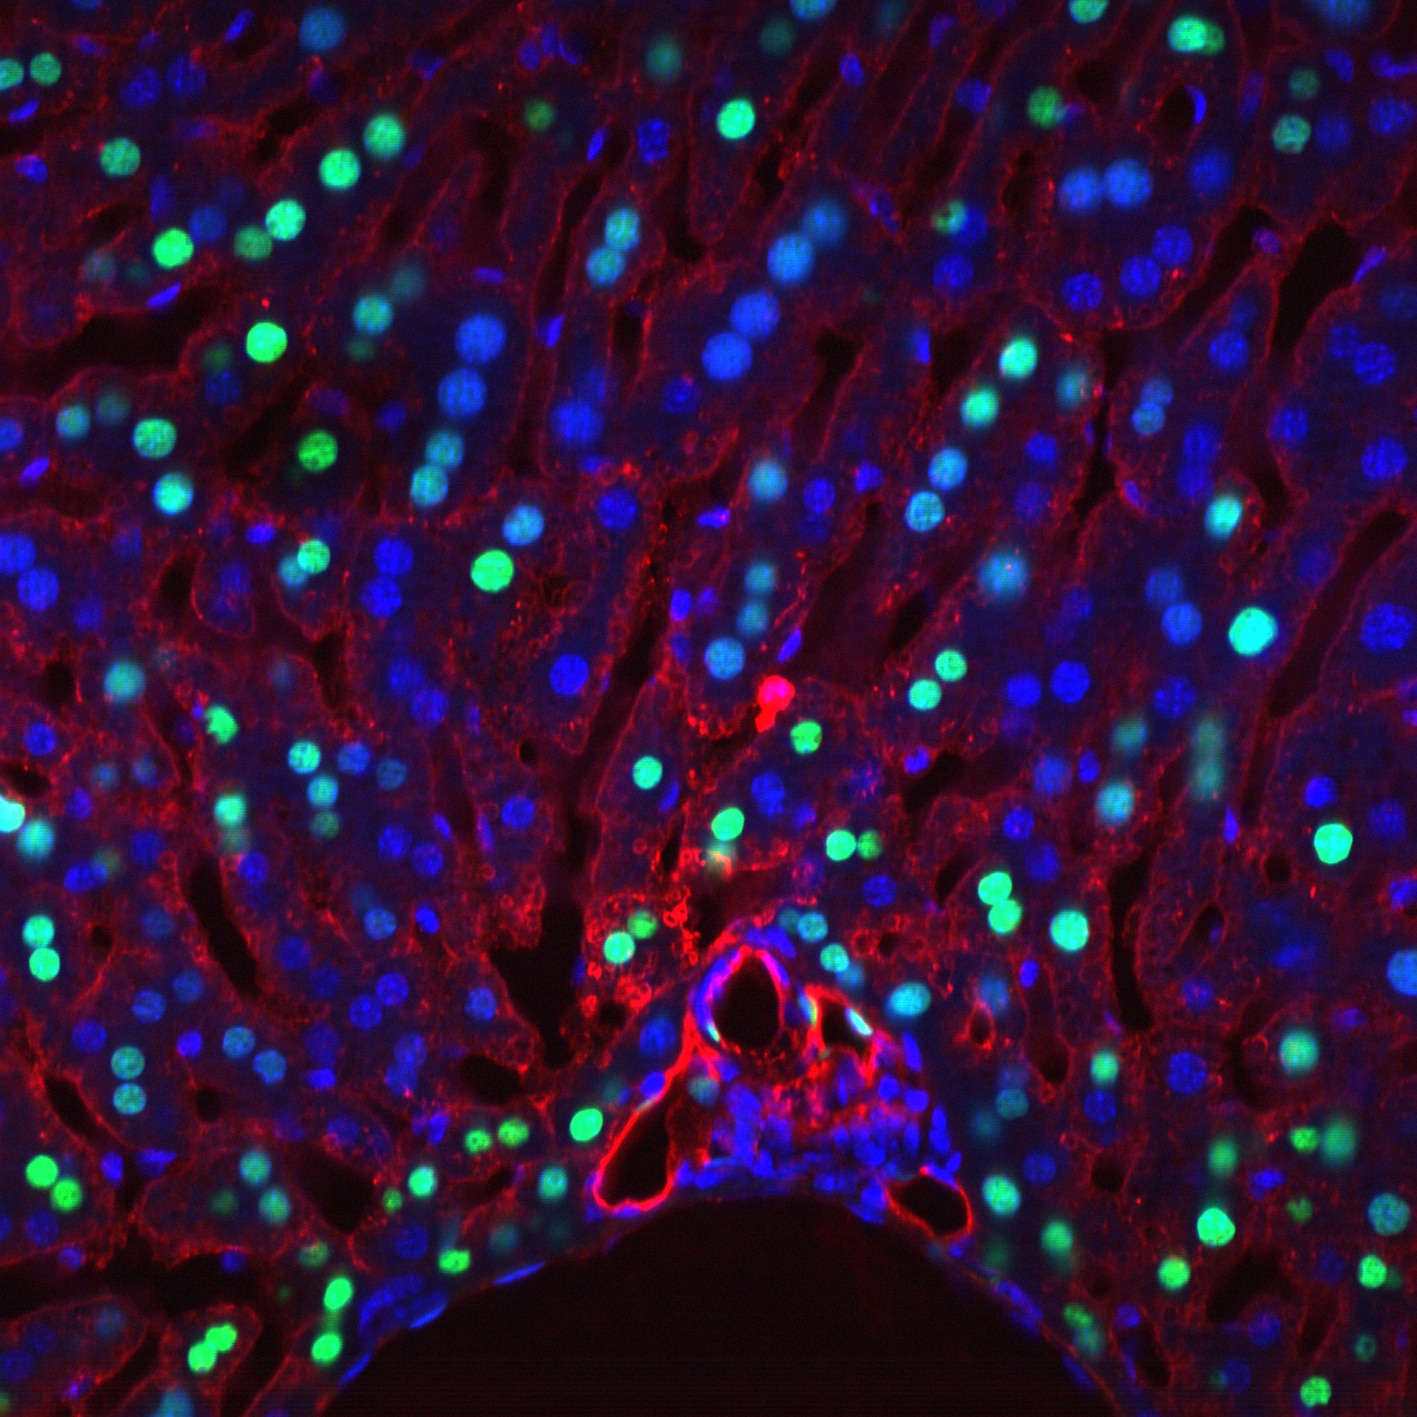 Photo showing cells that have undergone sphingosine-1-phosphate receptor 1 activation (green nuclei) in this liver section from SIP1 GFP reporter mice.